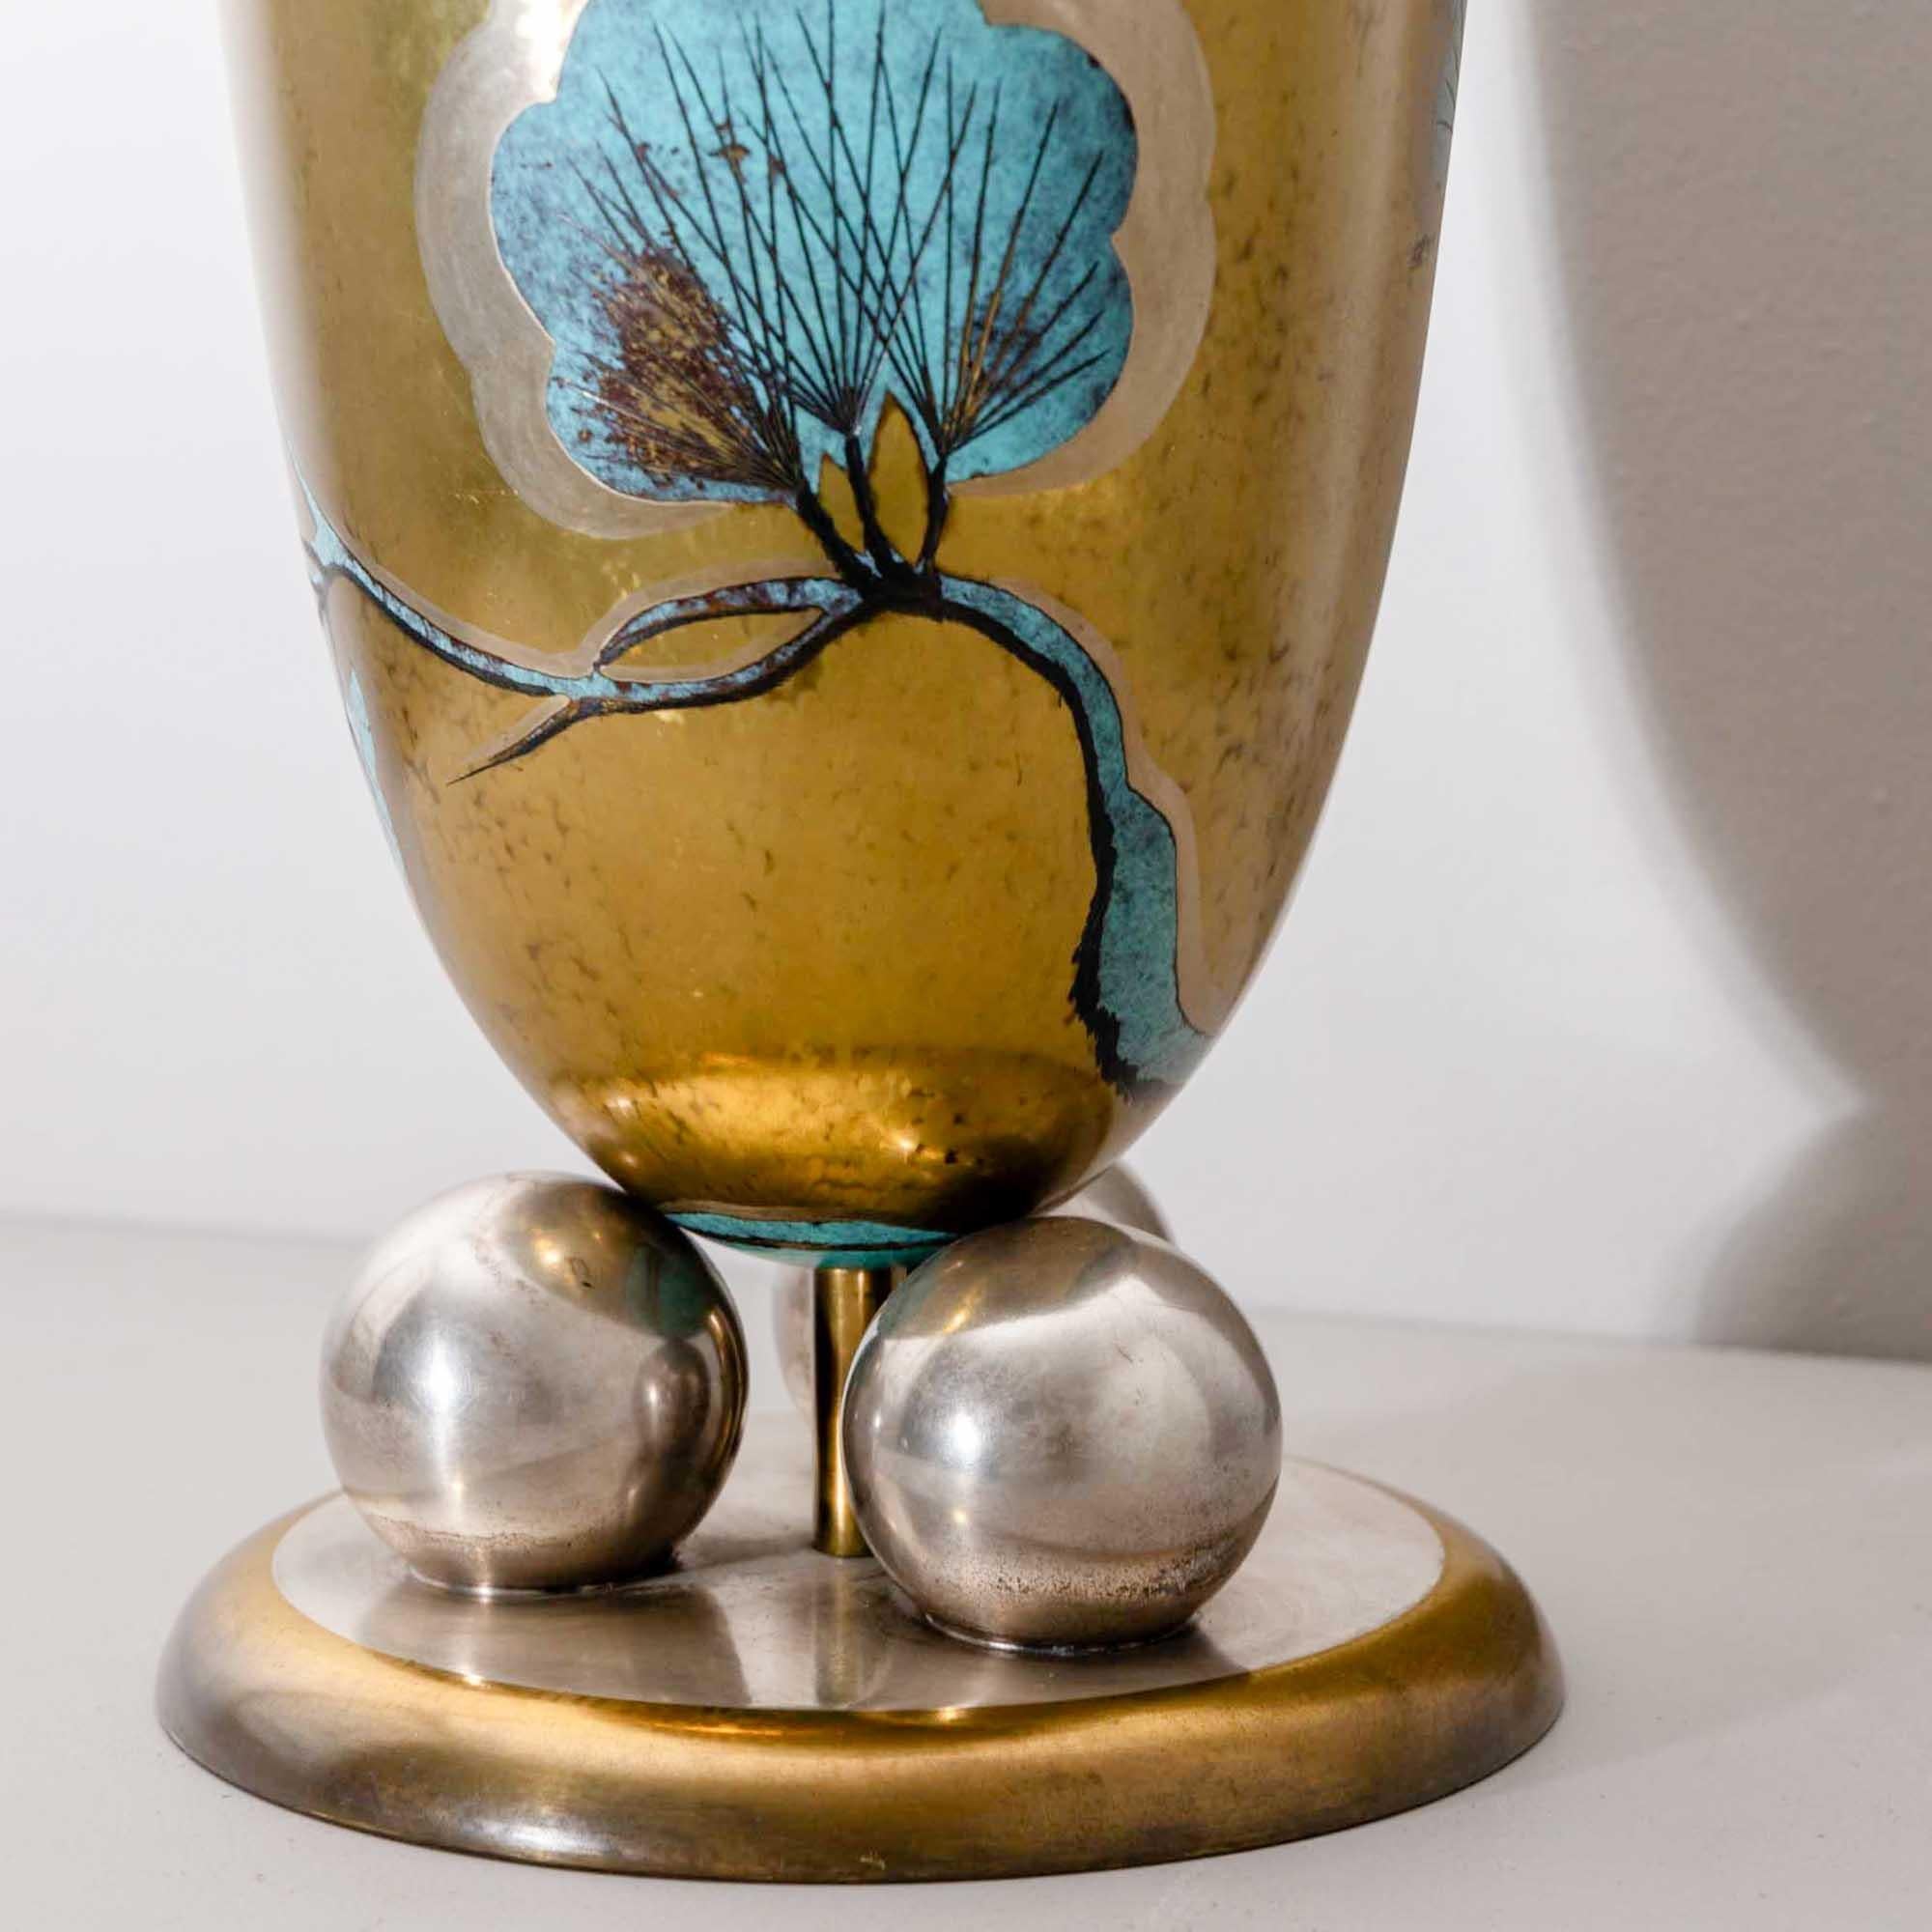 German Large WMF Vase with Pine Branch Décor, 1920s/30s For Sale